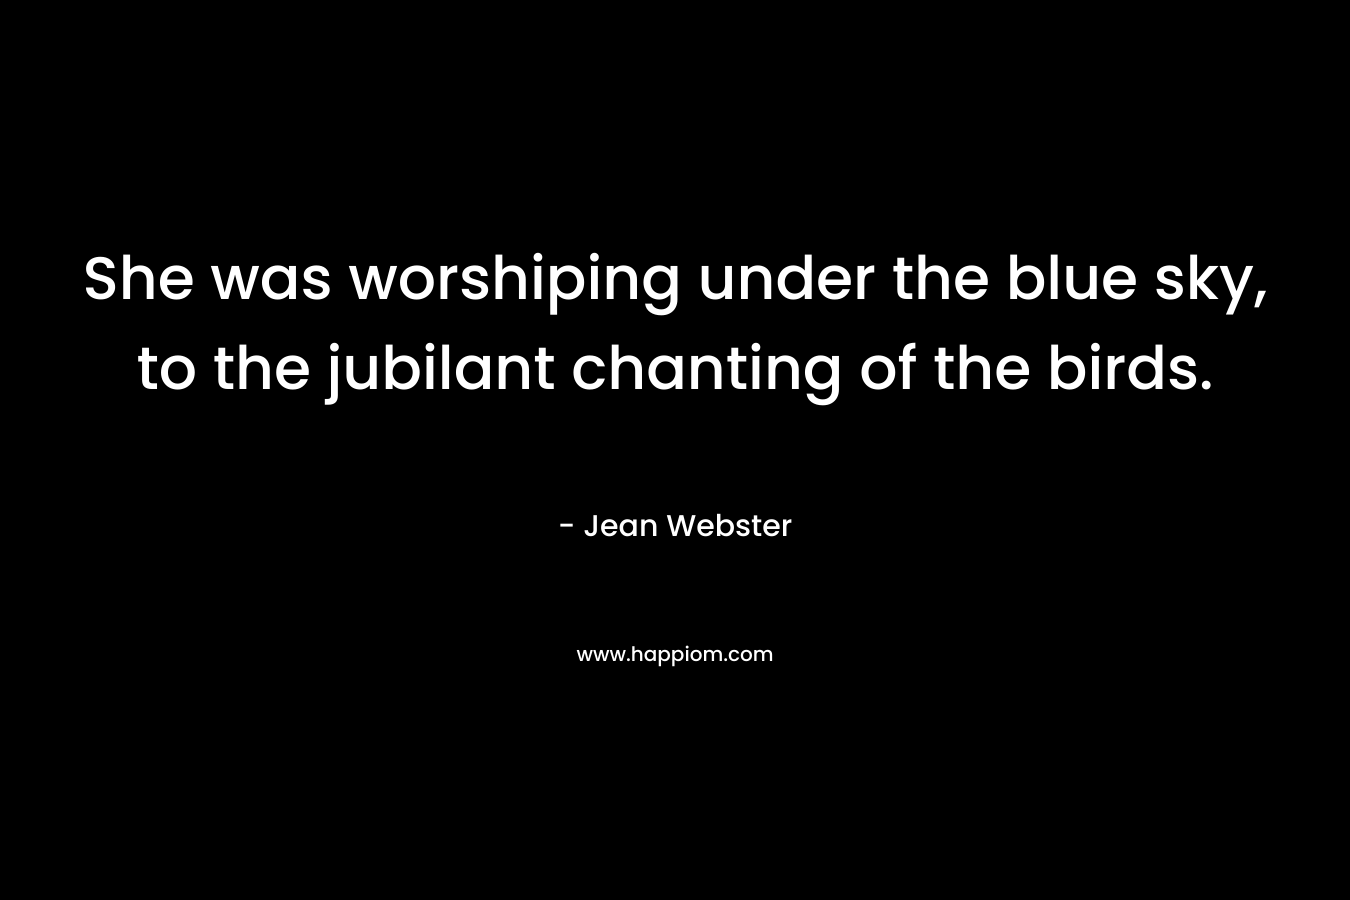 She was worshiping under the blue sky, to the jubilant chanting of the birds.